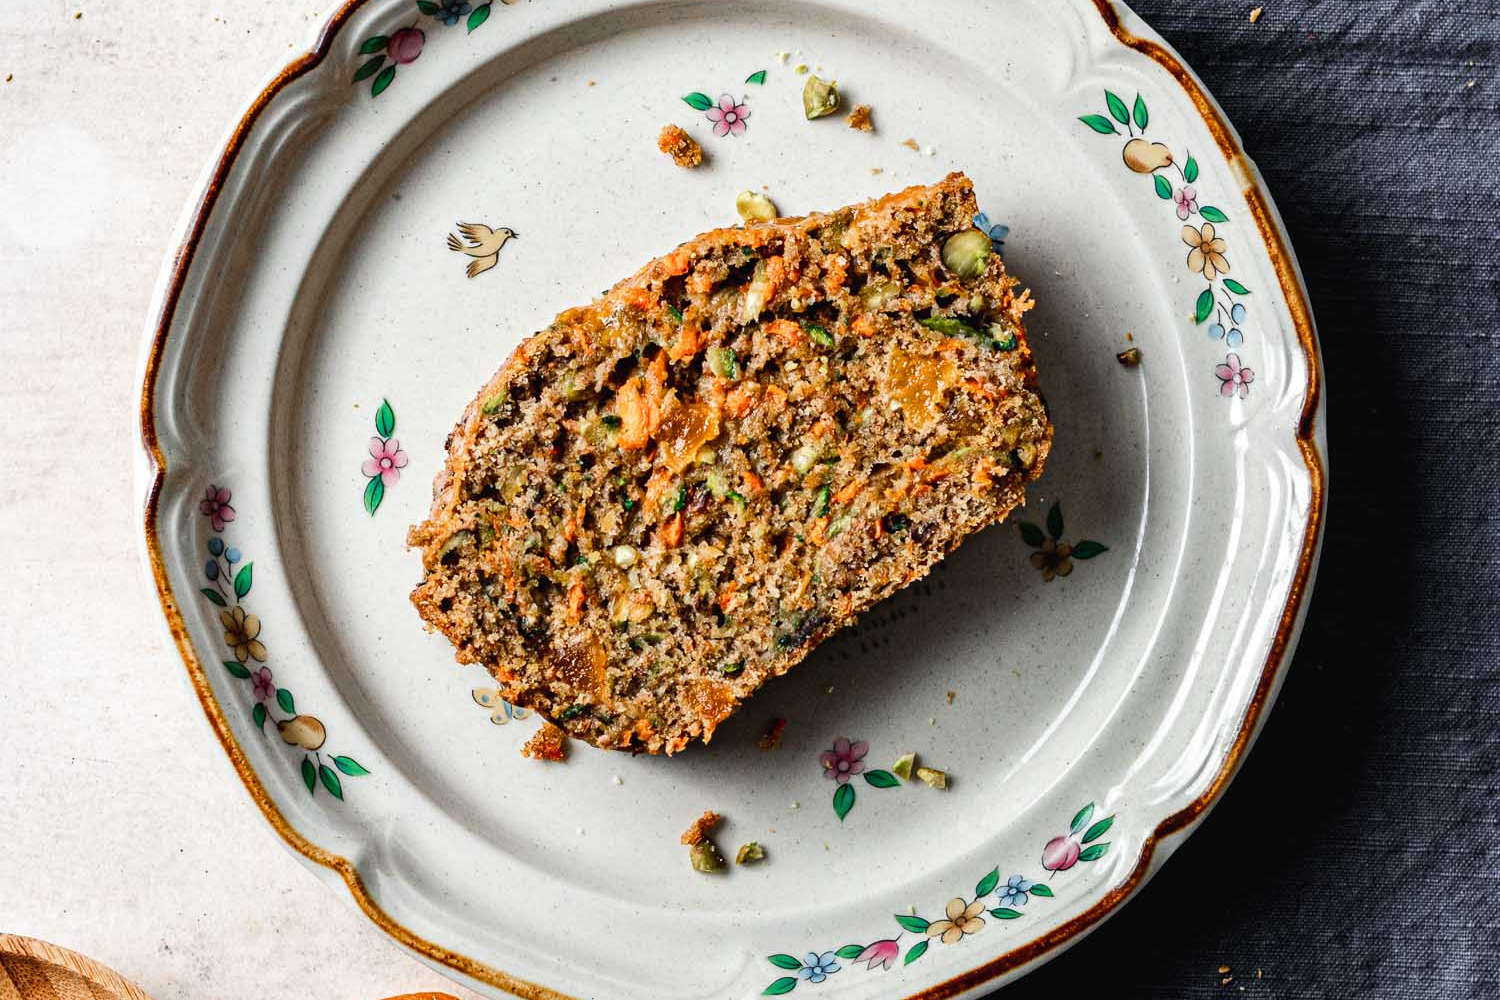 Slice of Carrot Zuchhini Bread on a plate.